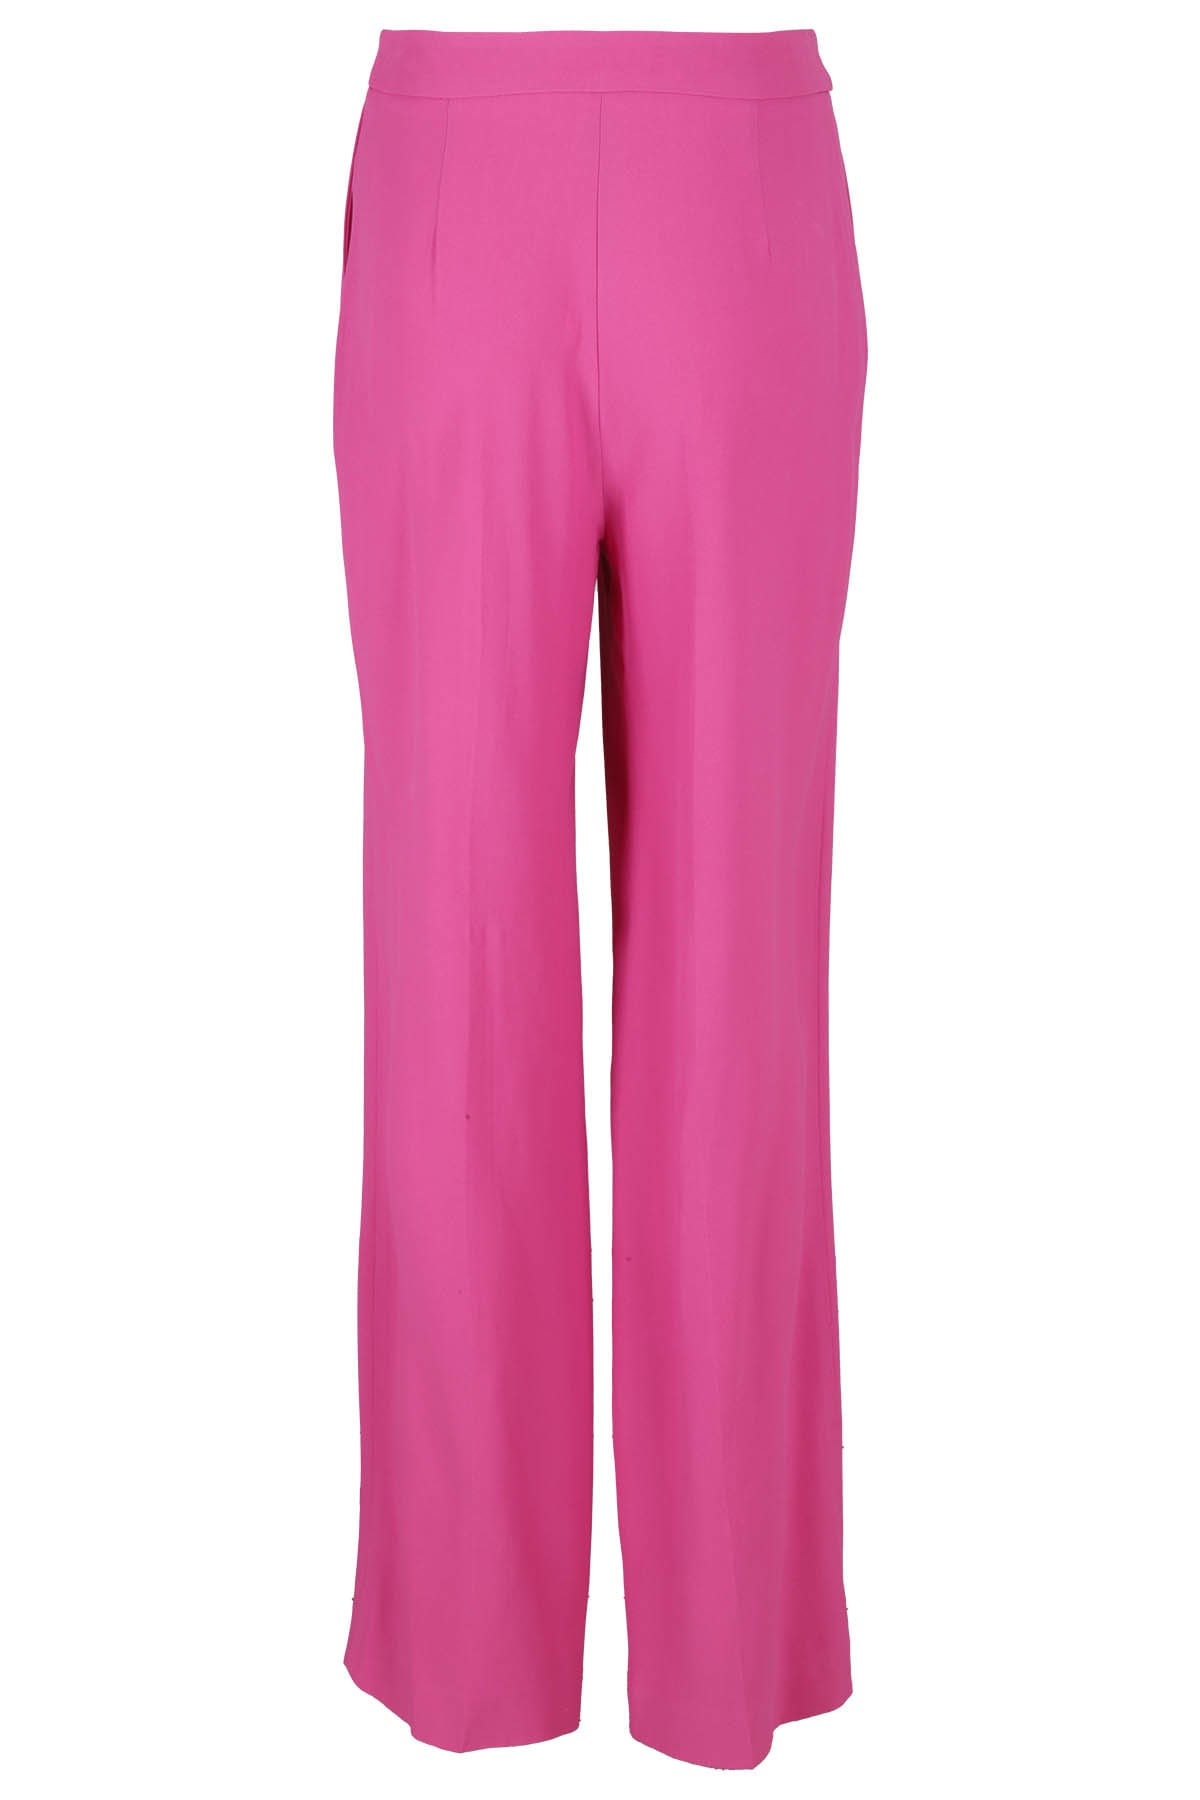 Shop Federica Tosi Pants In Buganville